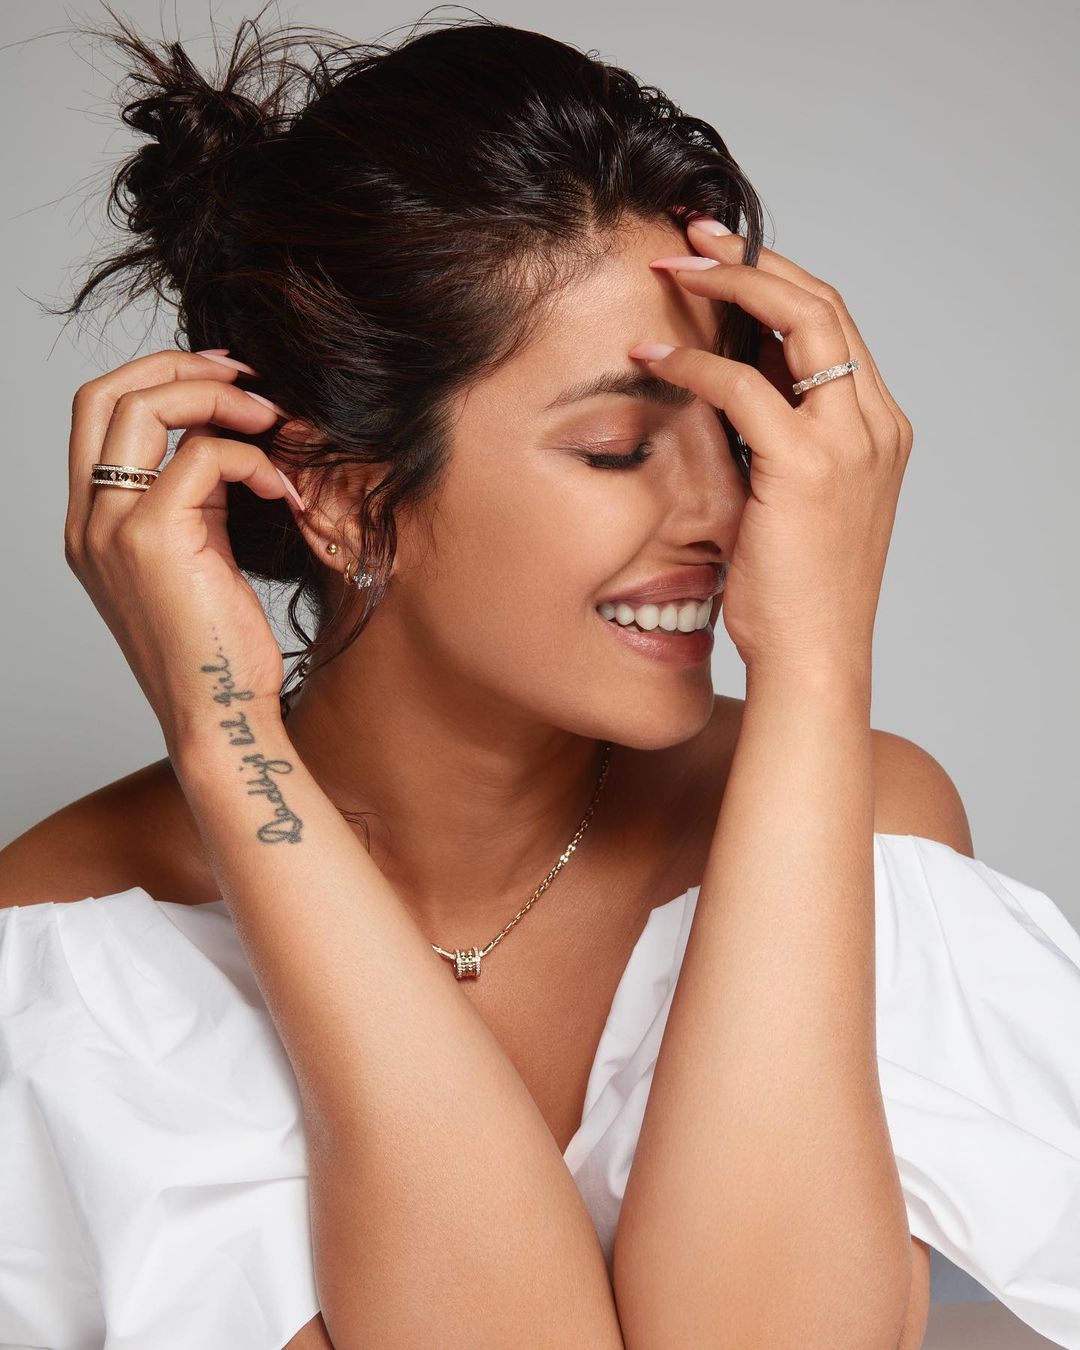 KL Rahuls tattoos  their meanings His 7 favourites